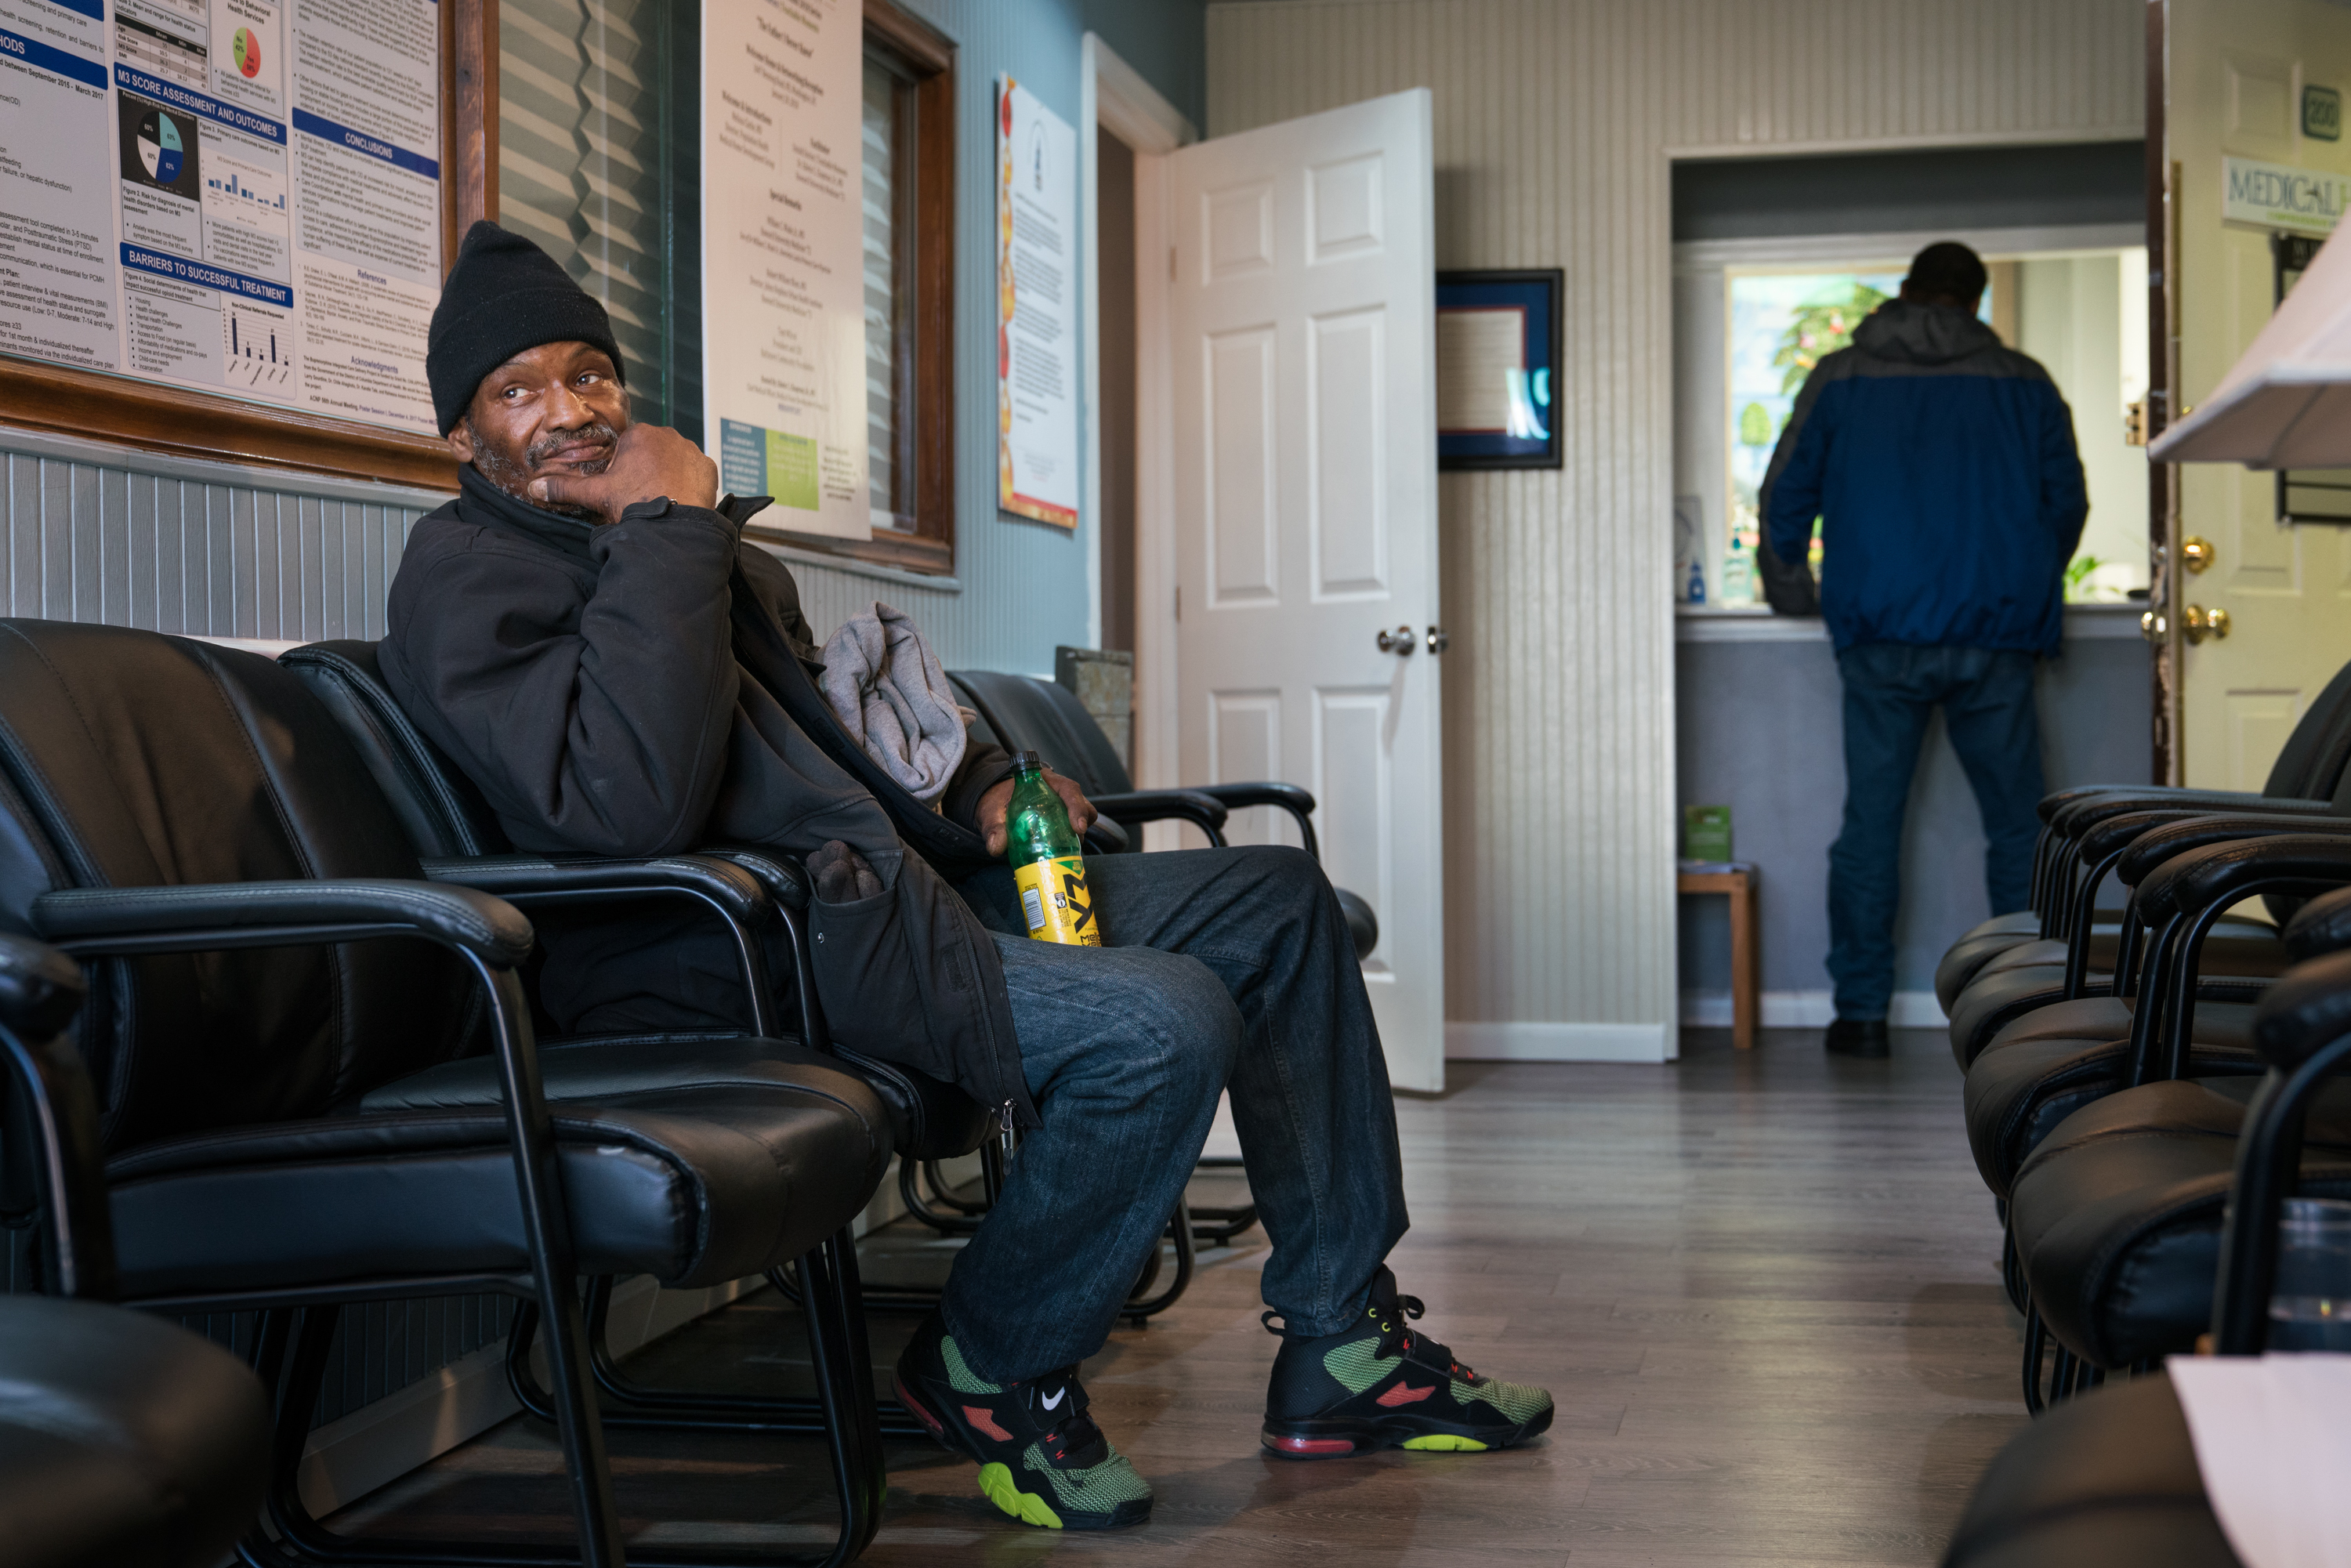 Gerald A. Goines Sr. sits in the waiting room of Dr. Chapman's clinic in Northeast Washington D.C. (Photo by Claire Harbage/NPR)